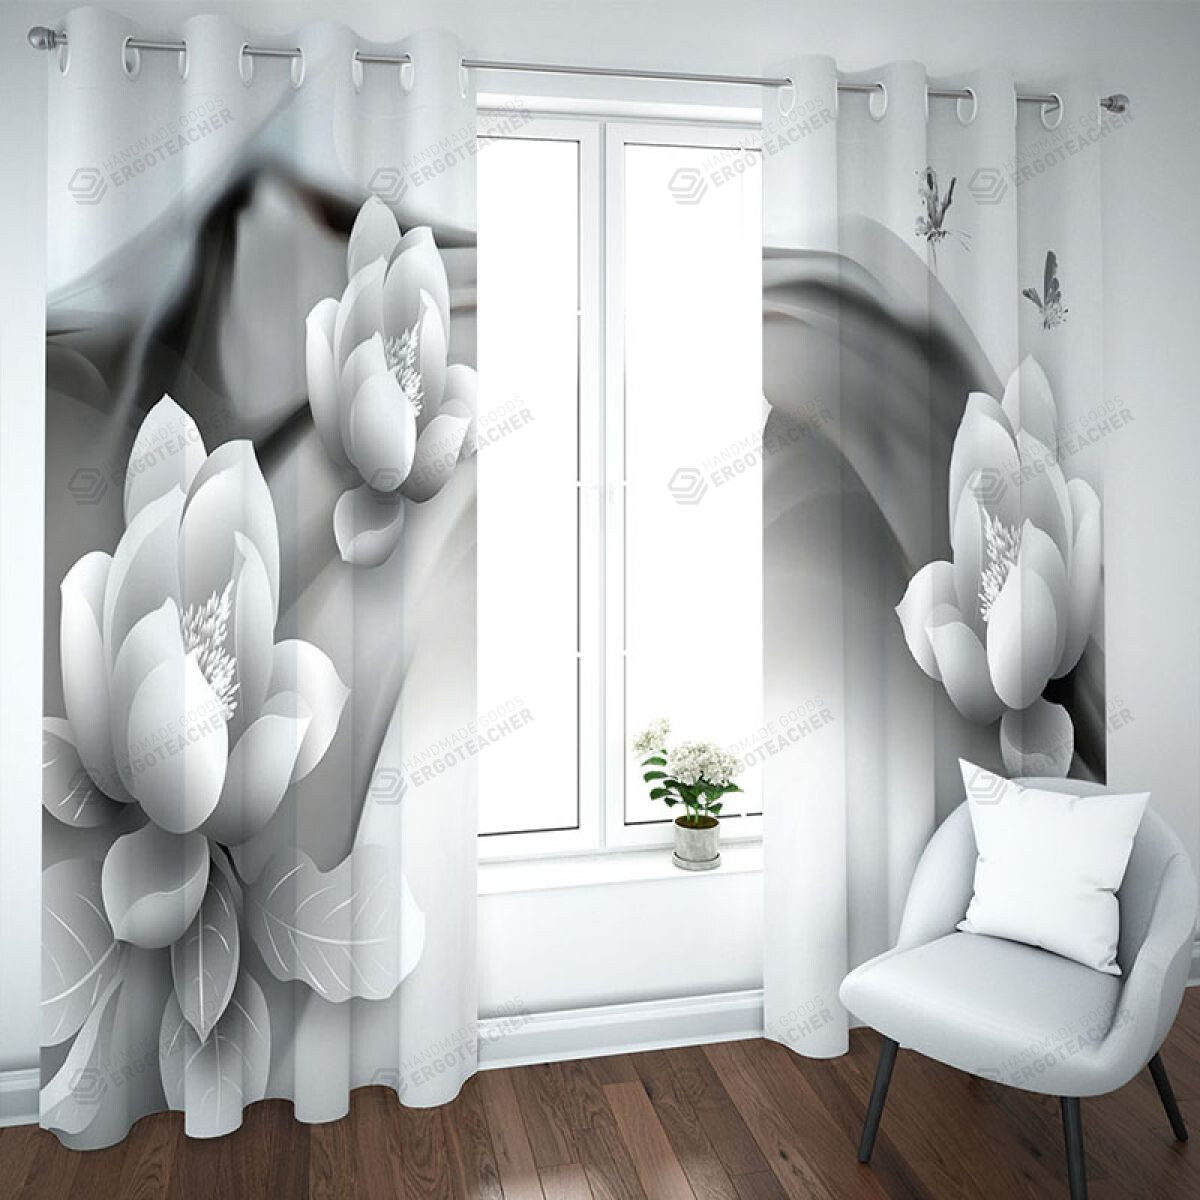 Butterflies And Floral Printed Window Curtains